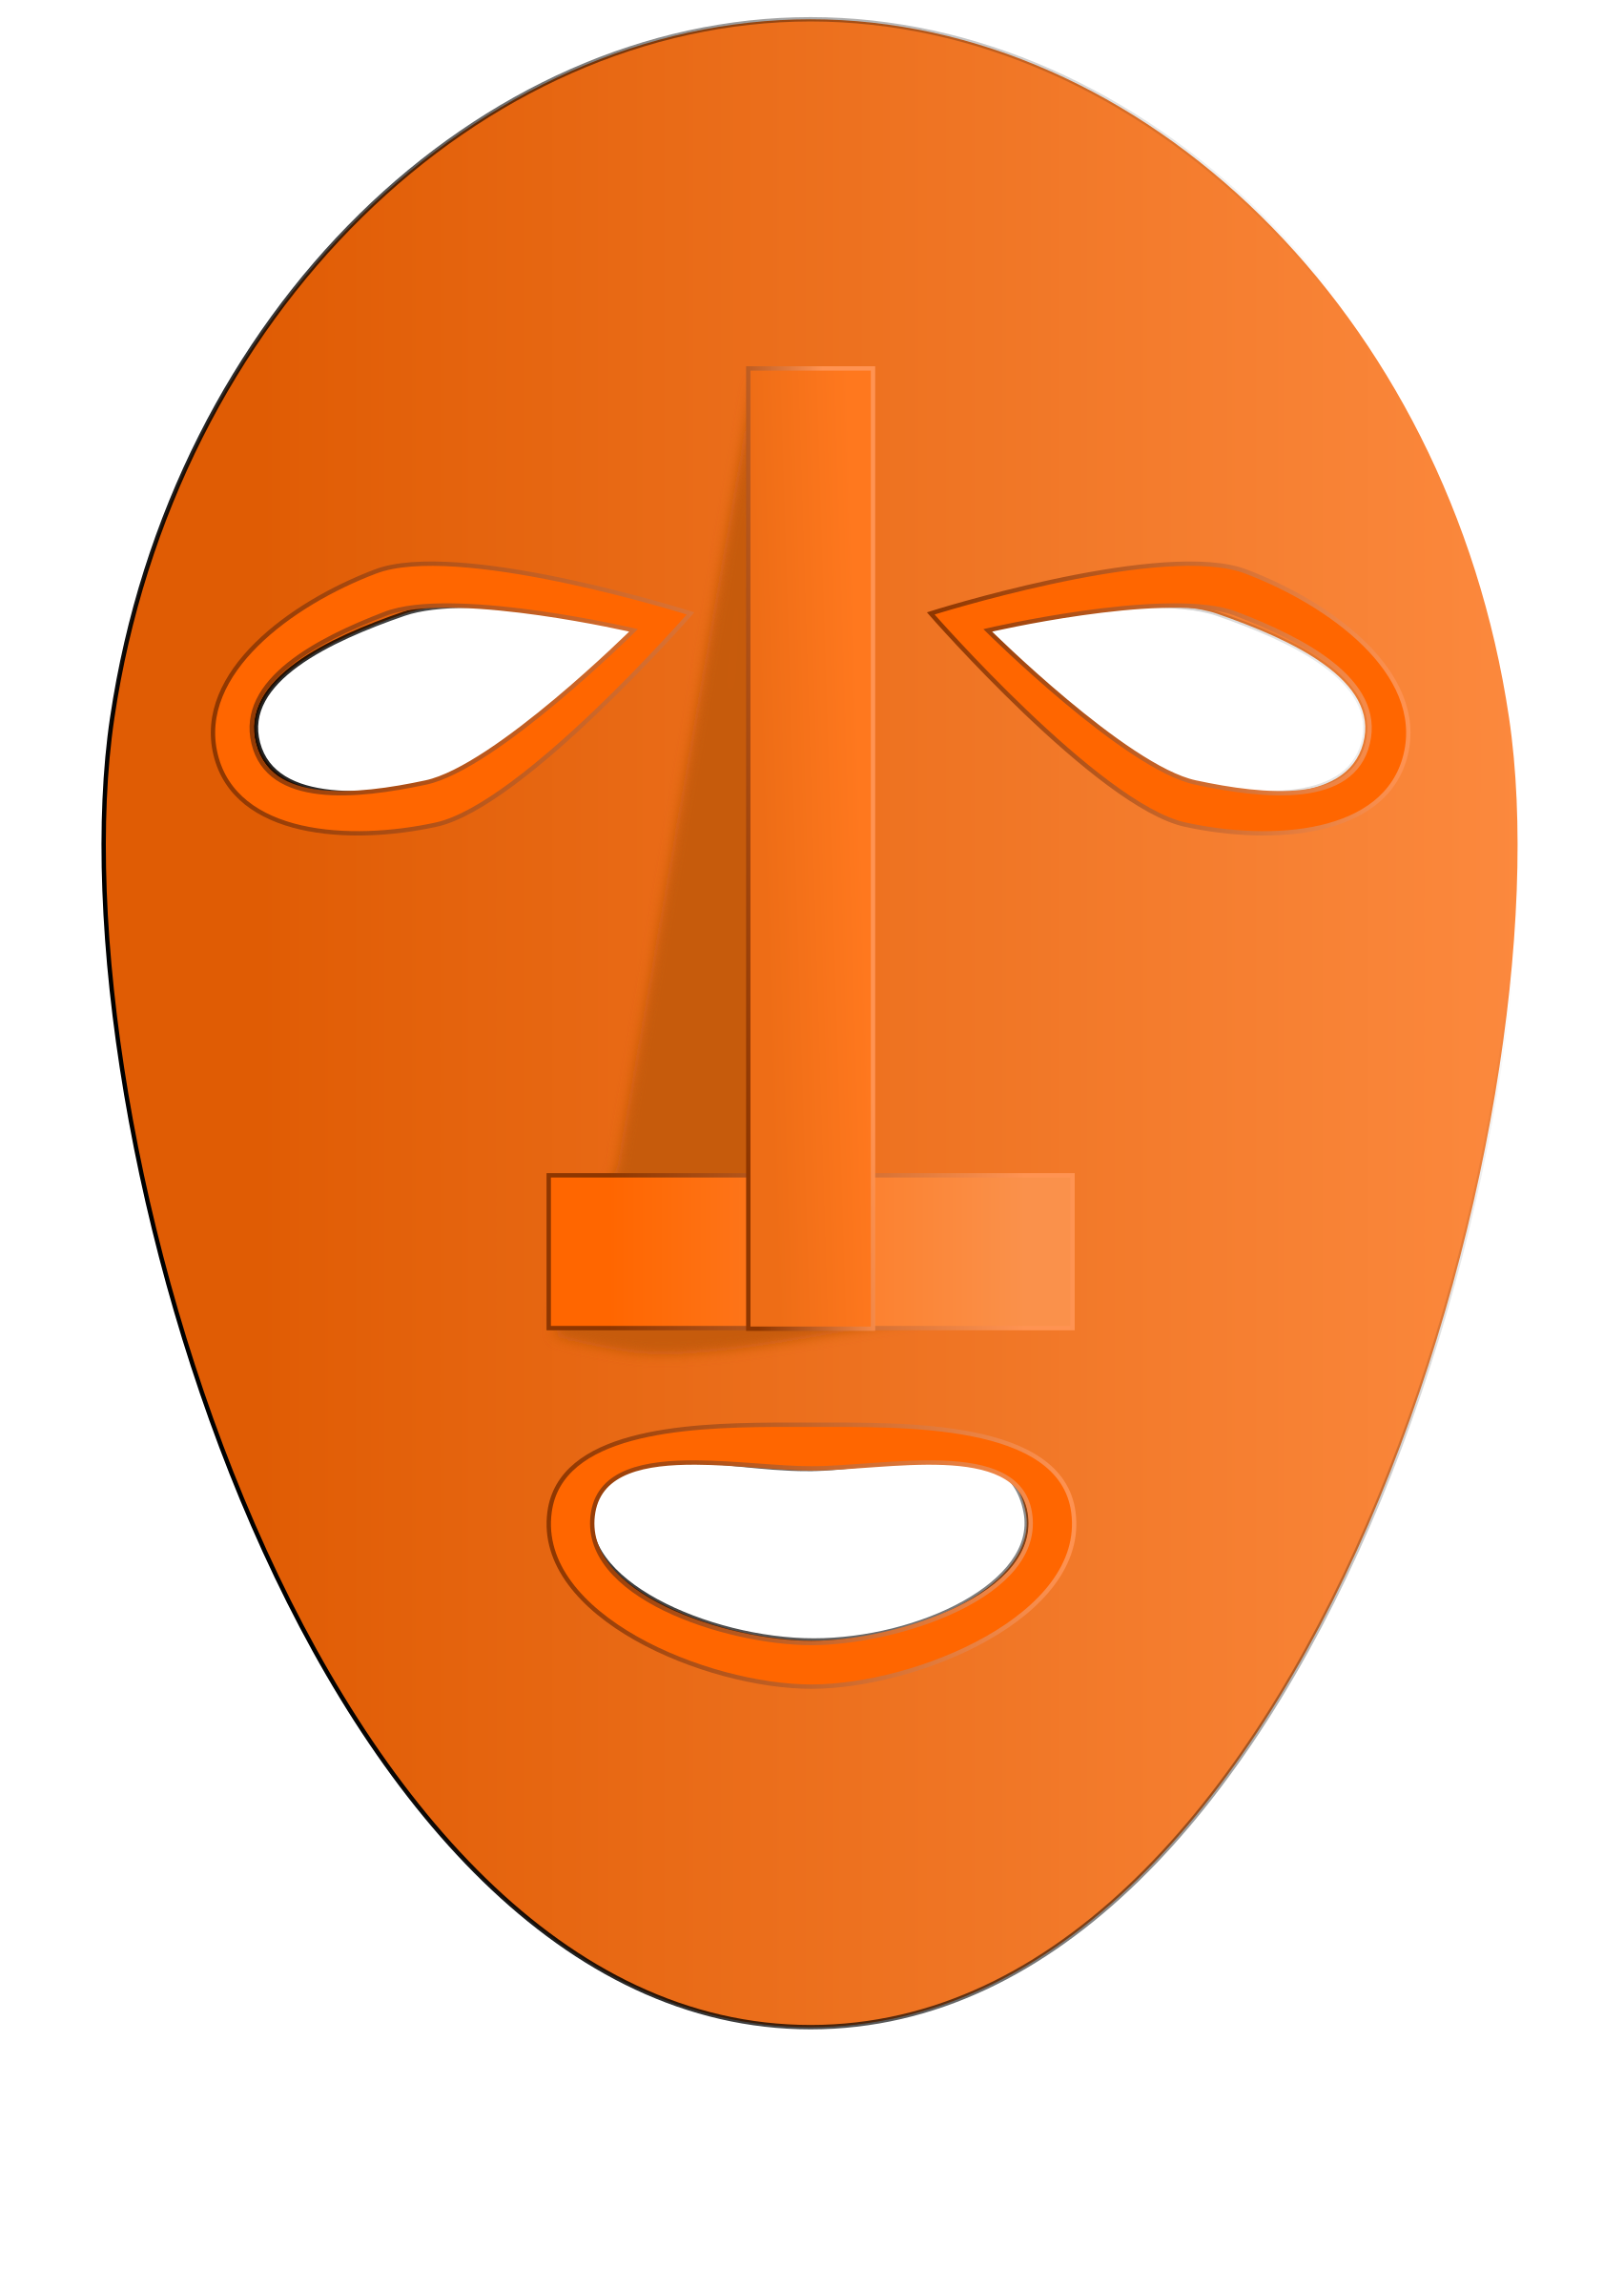 Download Mask clipart traditional, Mask traditional Transparent FREE for download on WebStockReview 2021